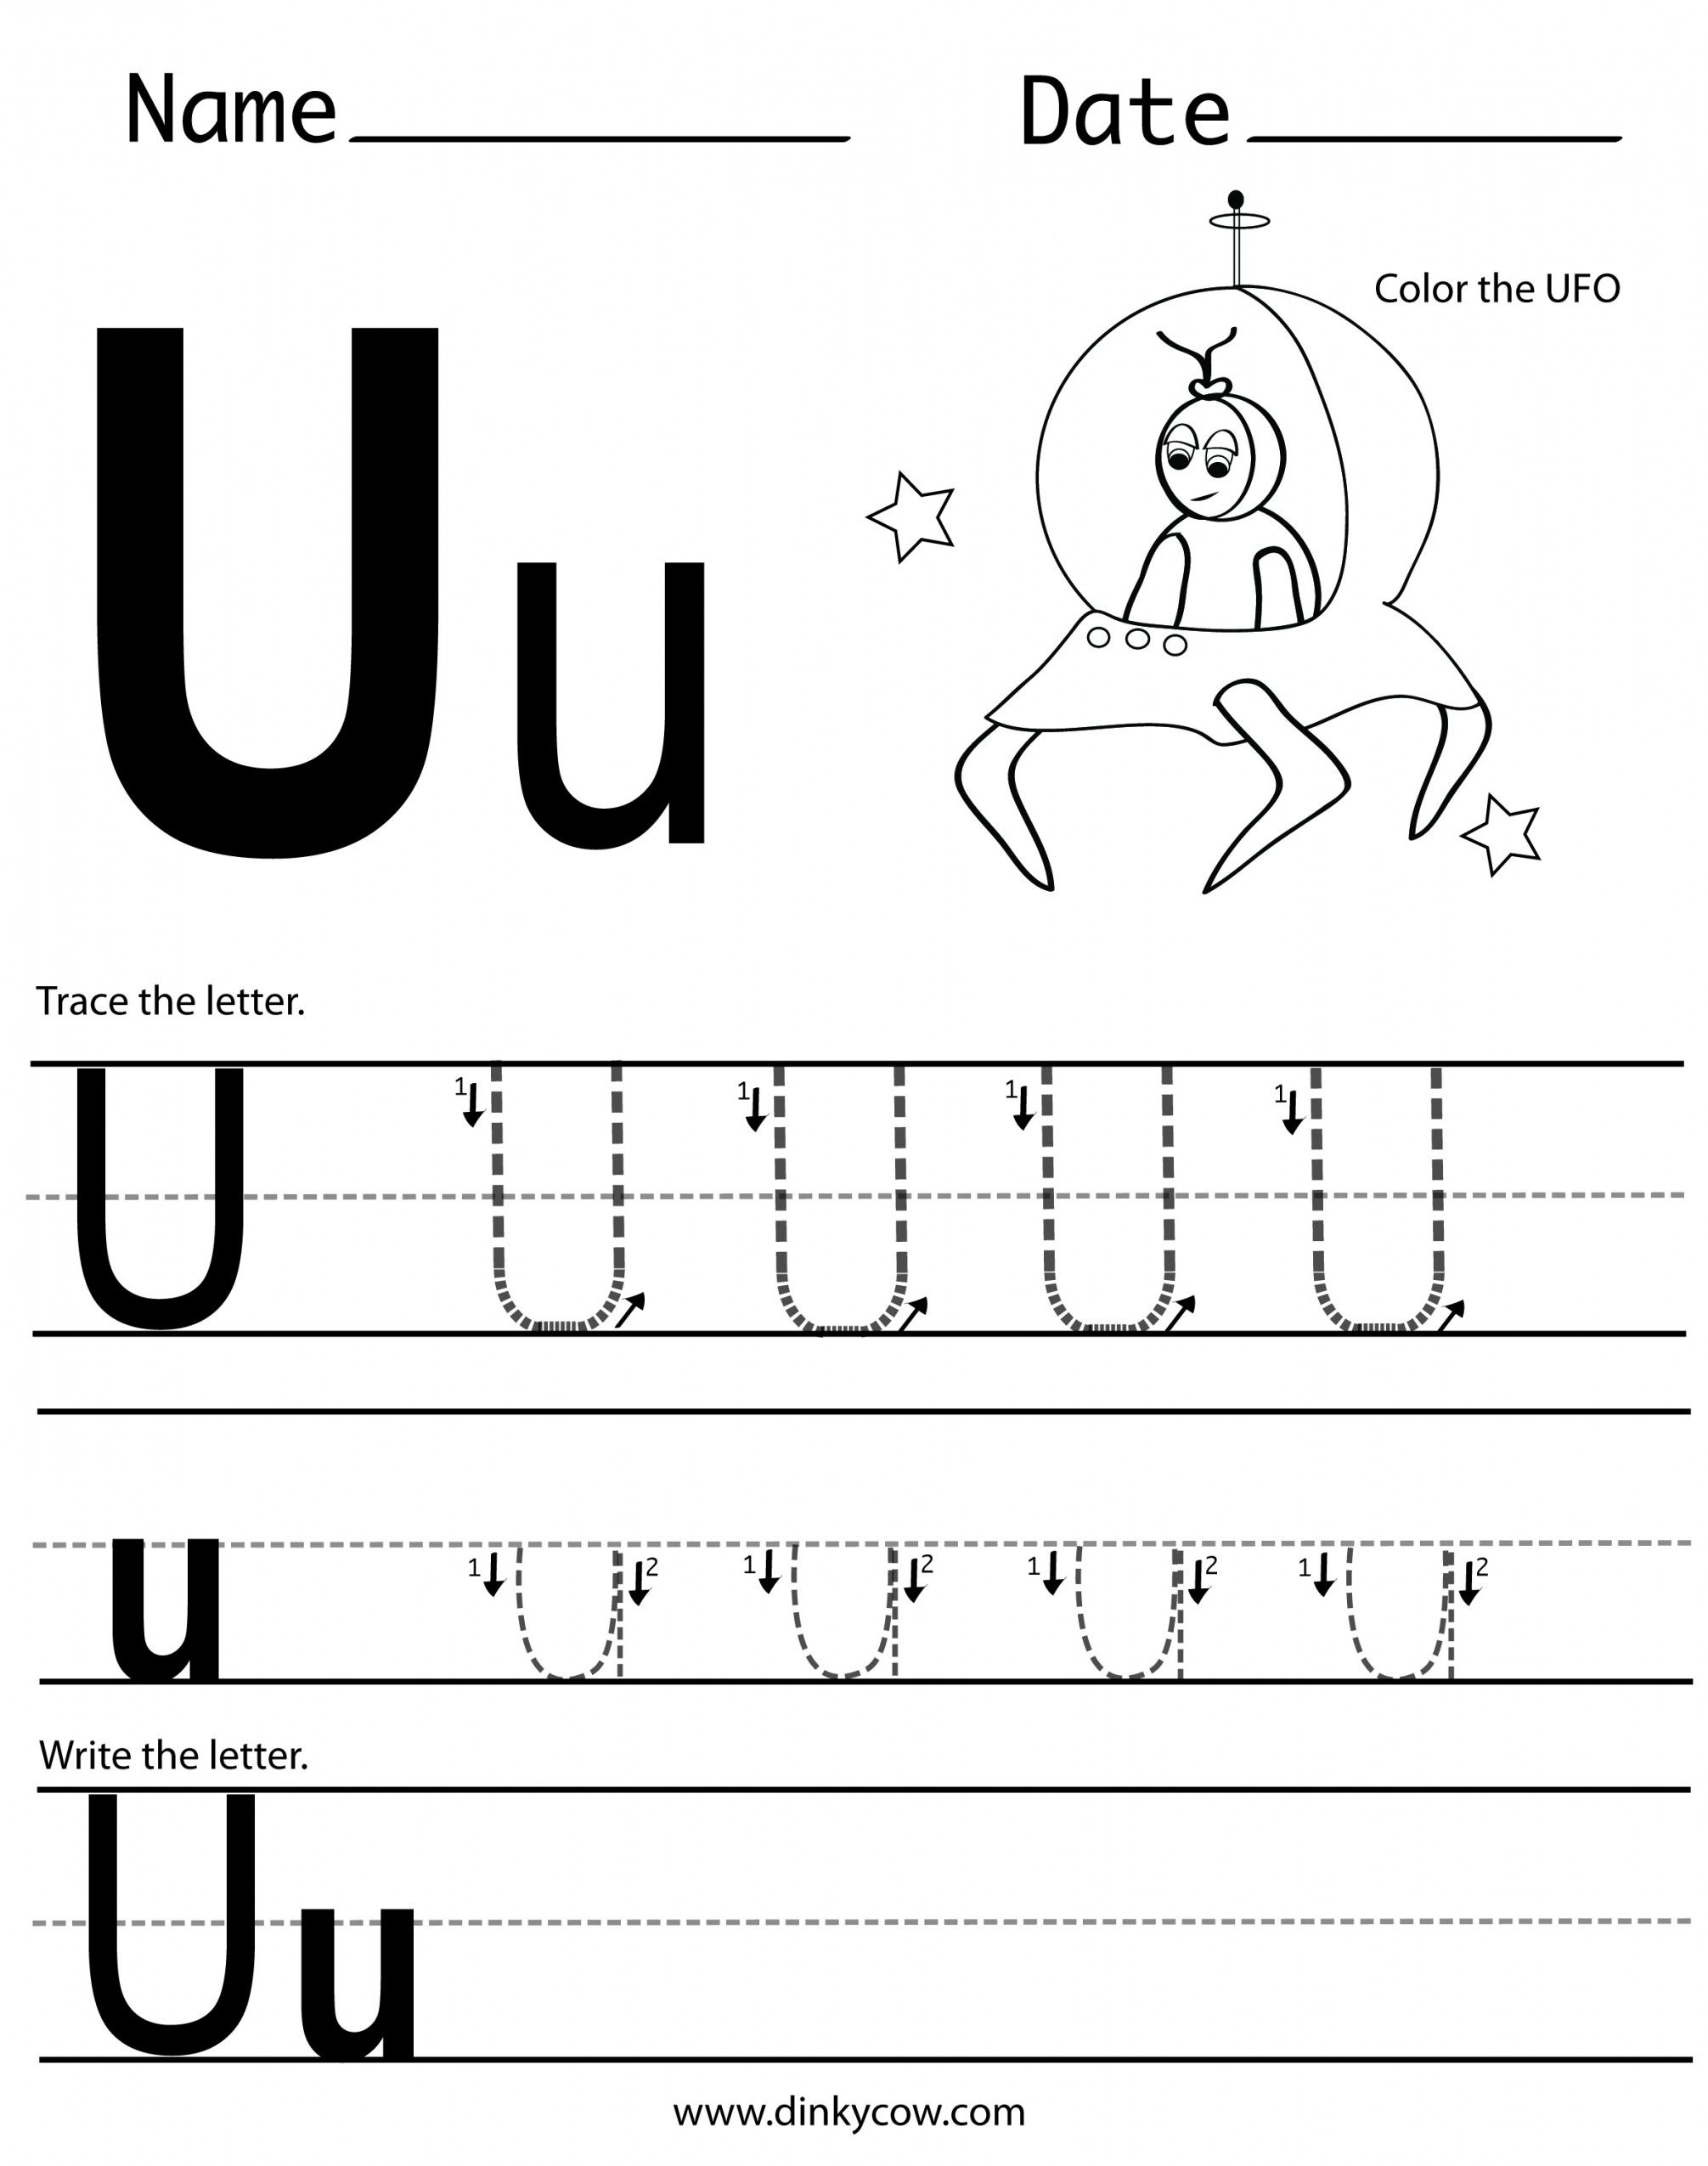 12 Letter U Worksheets For Young Learners | Kittybabylove for Tracing Letter U Worksheets